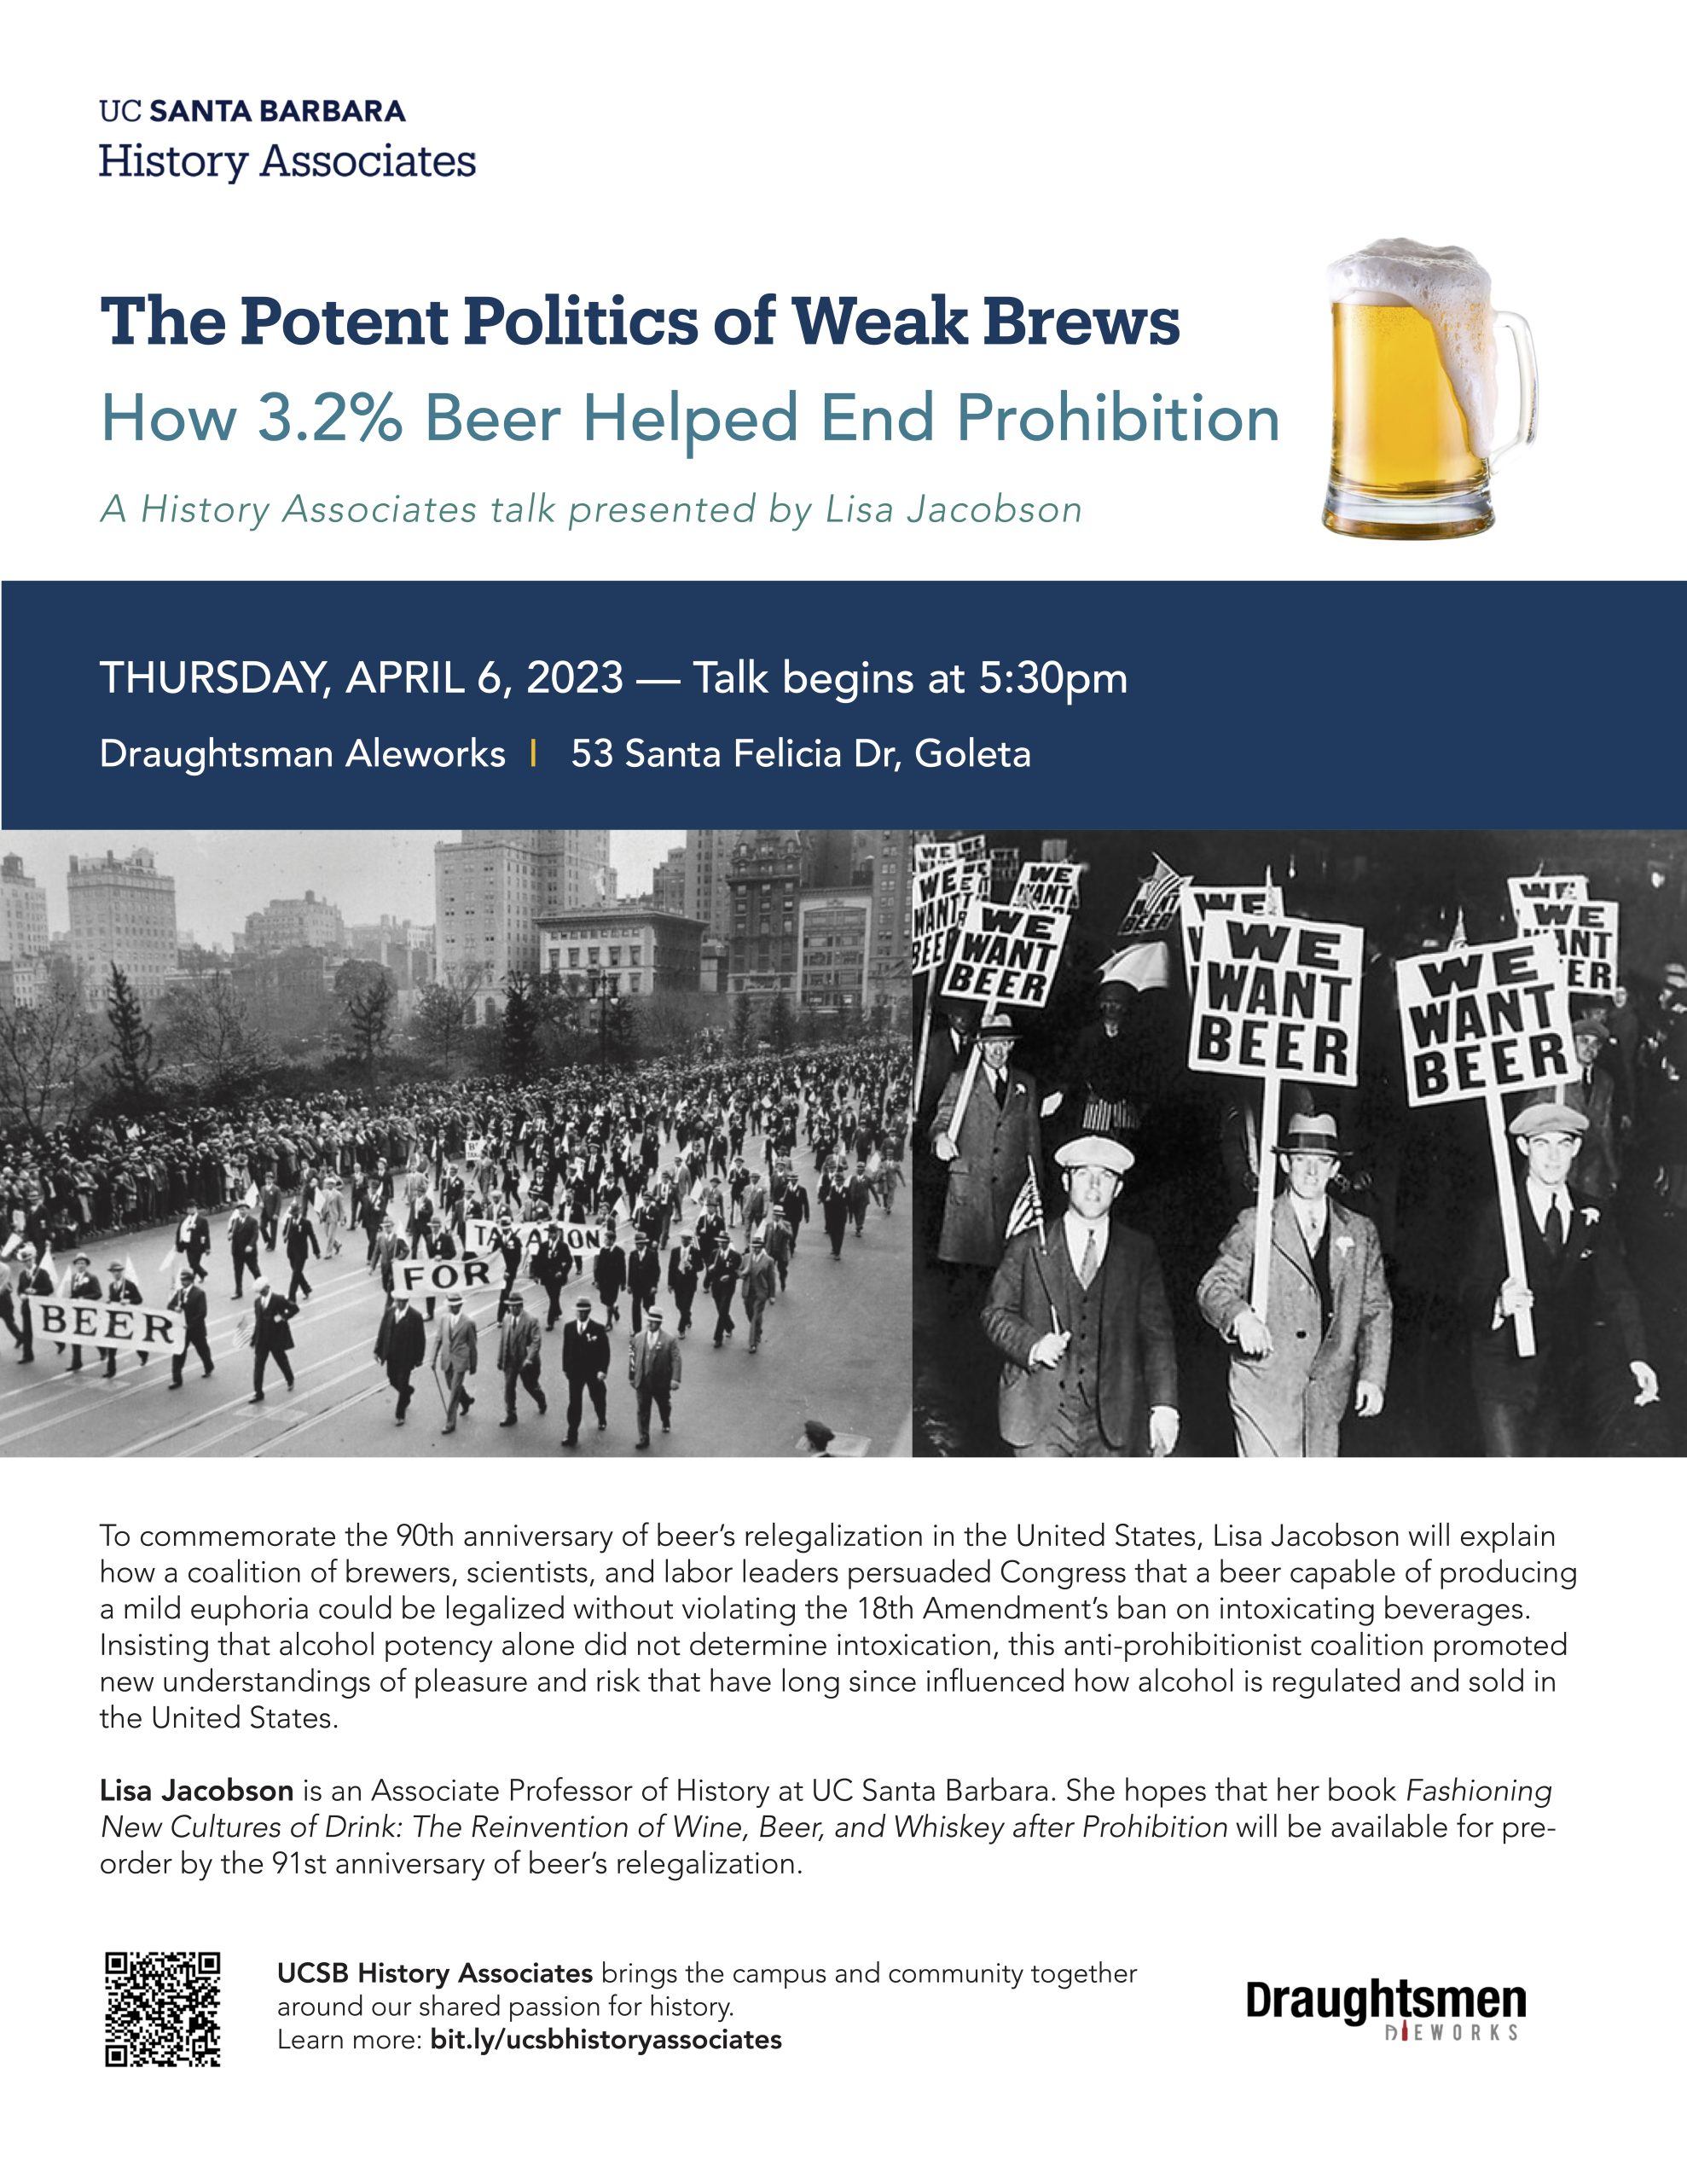 Flyer for "The Potent Politics of Weak Brews: How 3.2% Beer Helped End Prohibition" by Lisa Jacobson on April 6 at 5:30PM